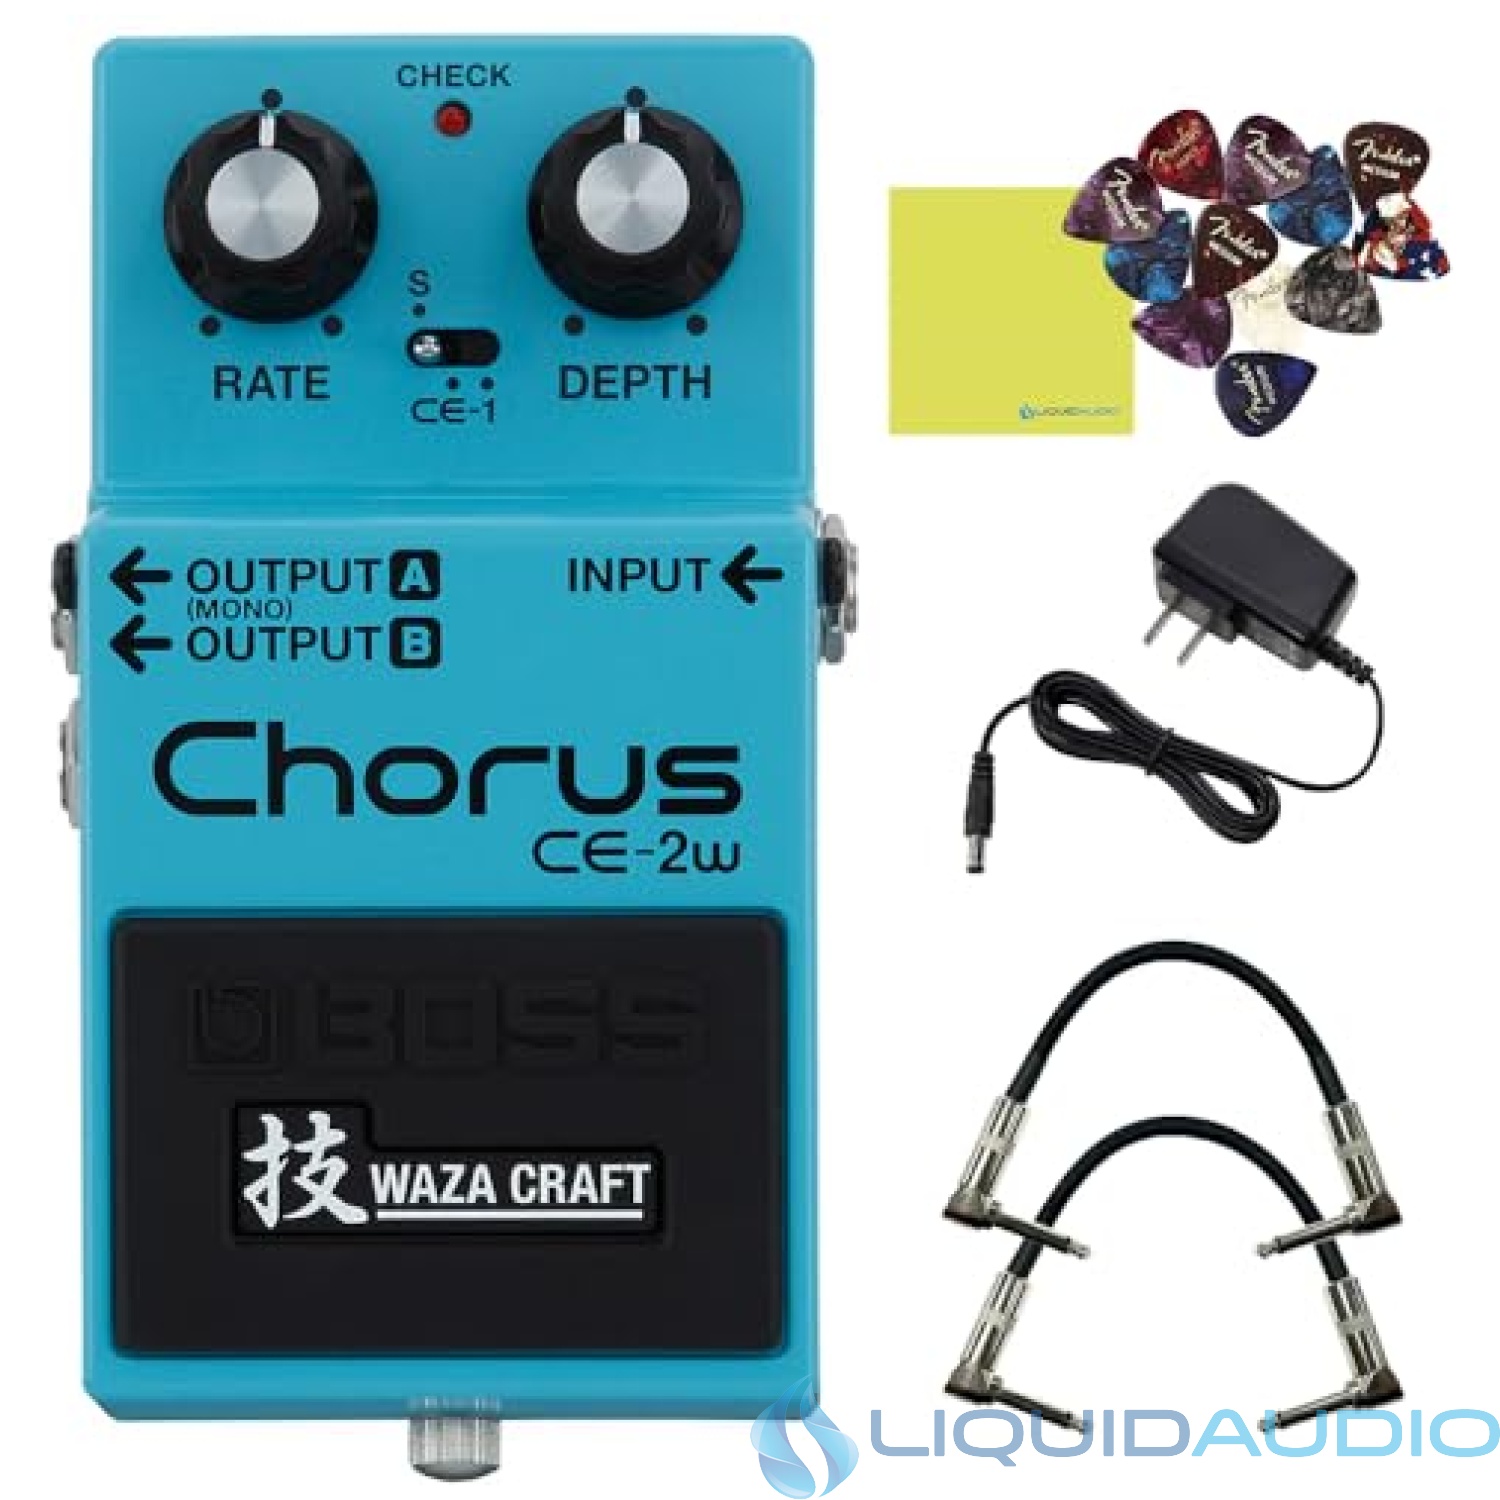 Boss CE-2W Waza Craft Chorus Pedal Bundle w/2x Strukture S6P48 Woven Right Angle Patch Cables, 12x Guitar Picks, 9V Power Adapter and Liquid Audio Polishing Cloth